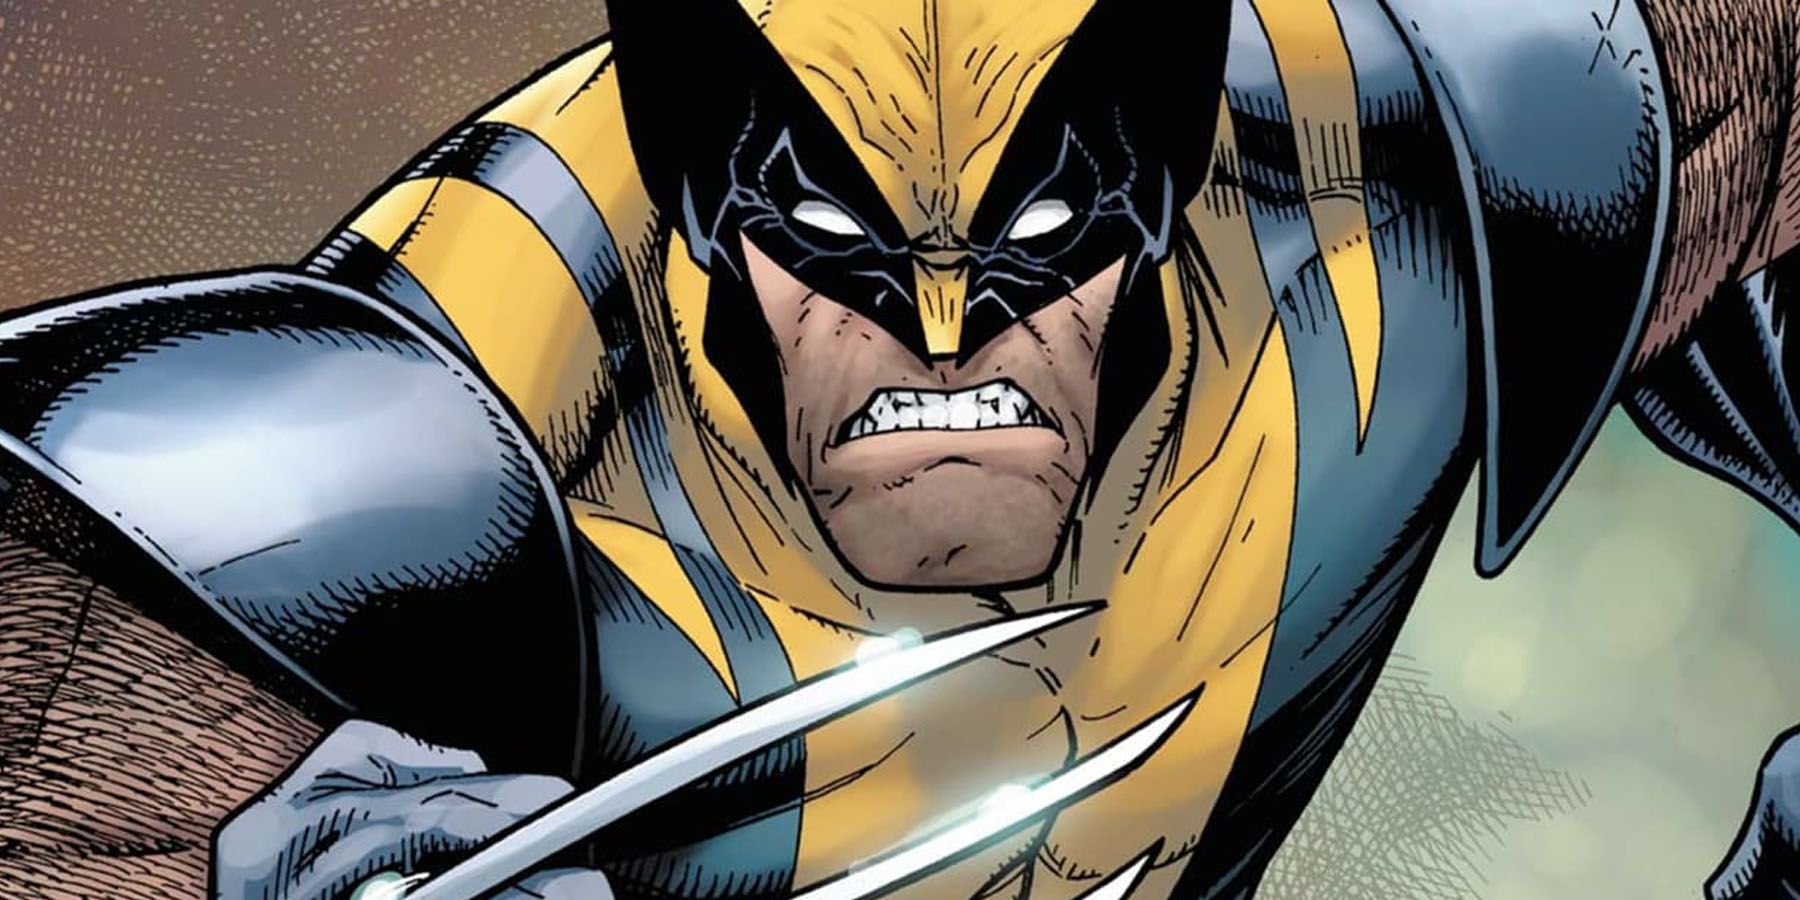 An image of Wolverine in his classic yellow and blue costume from Marvel Comics.